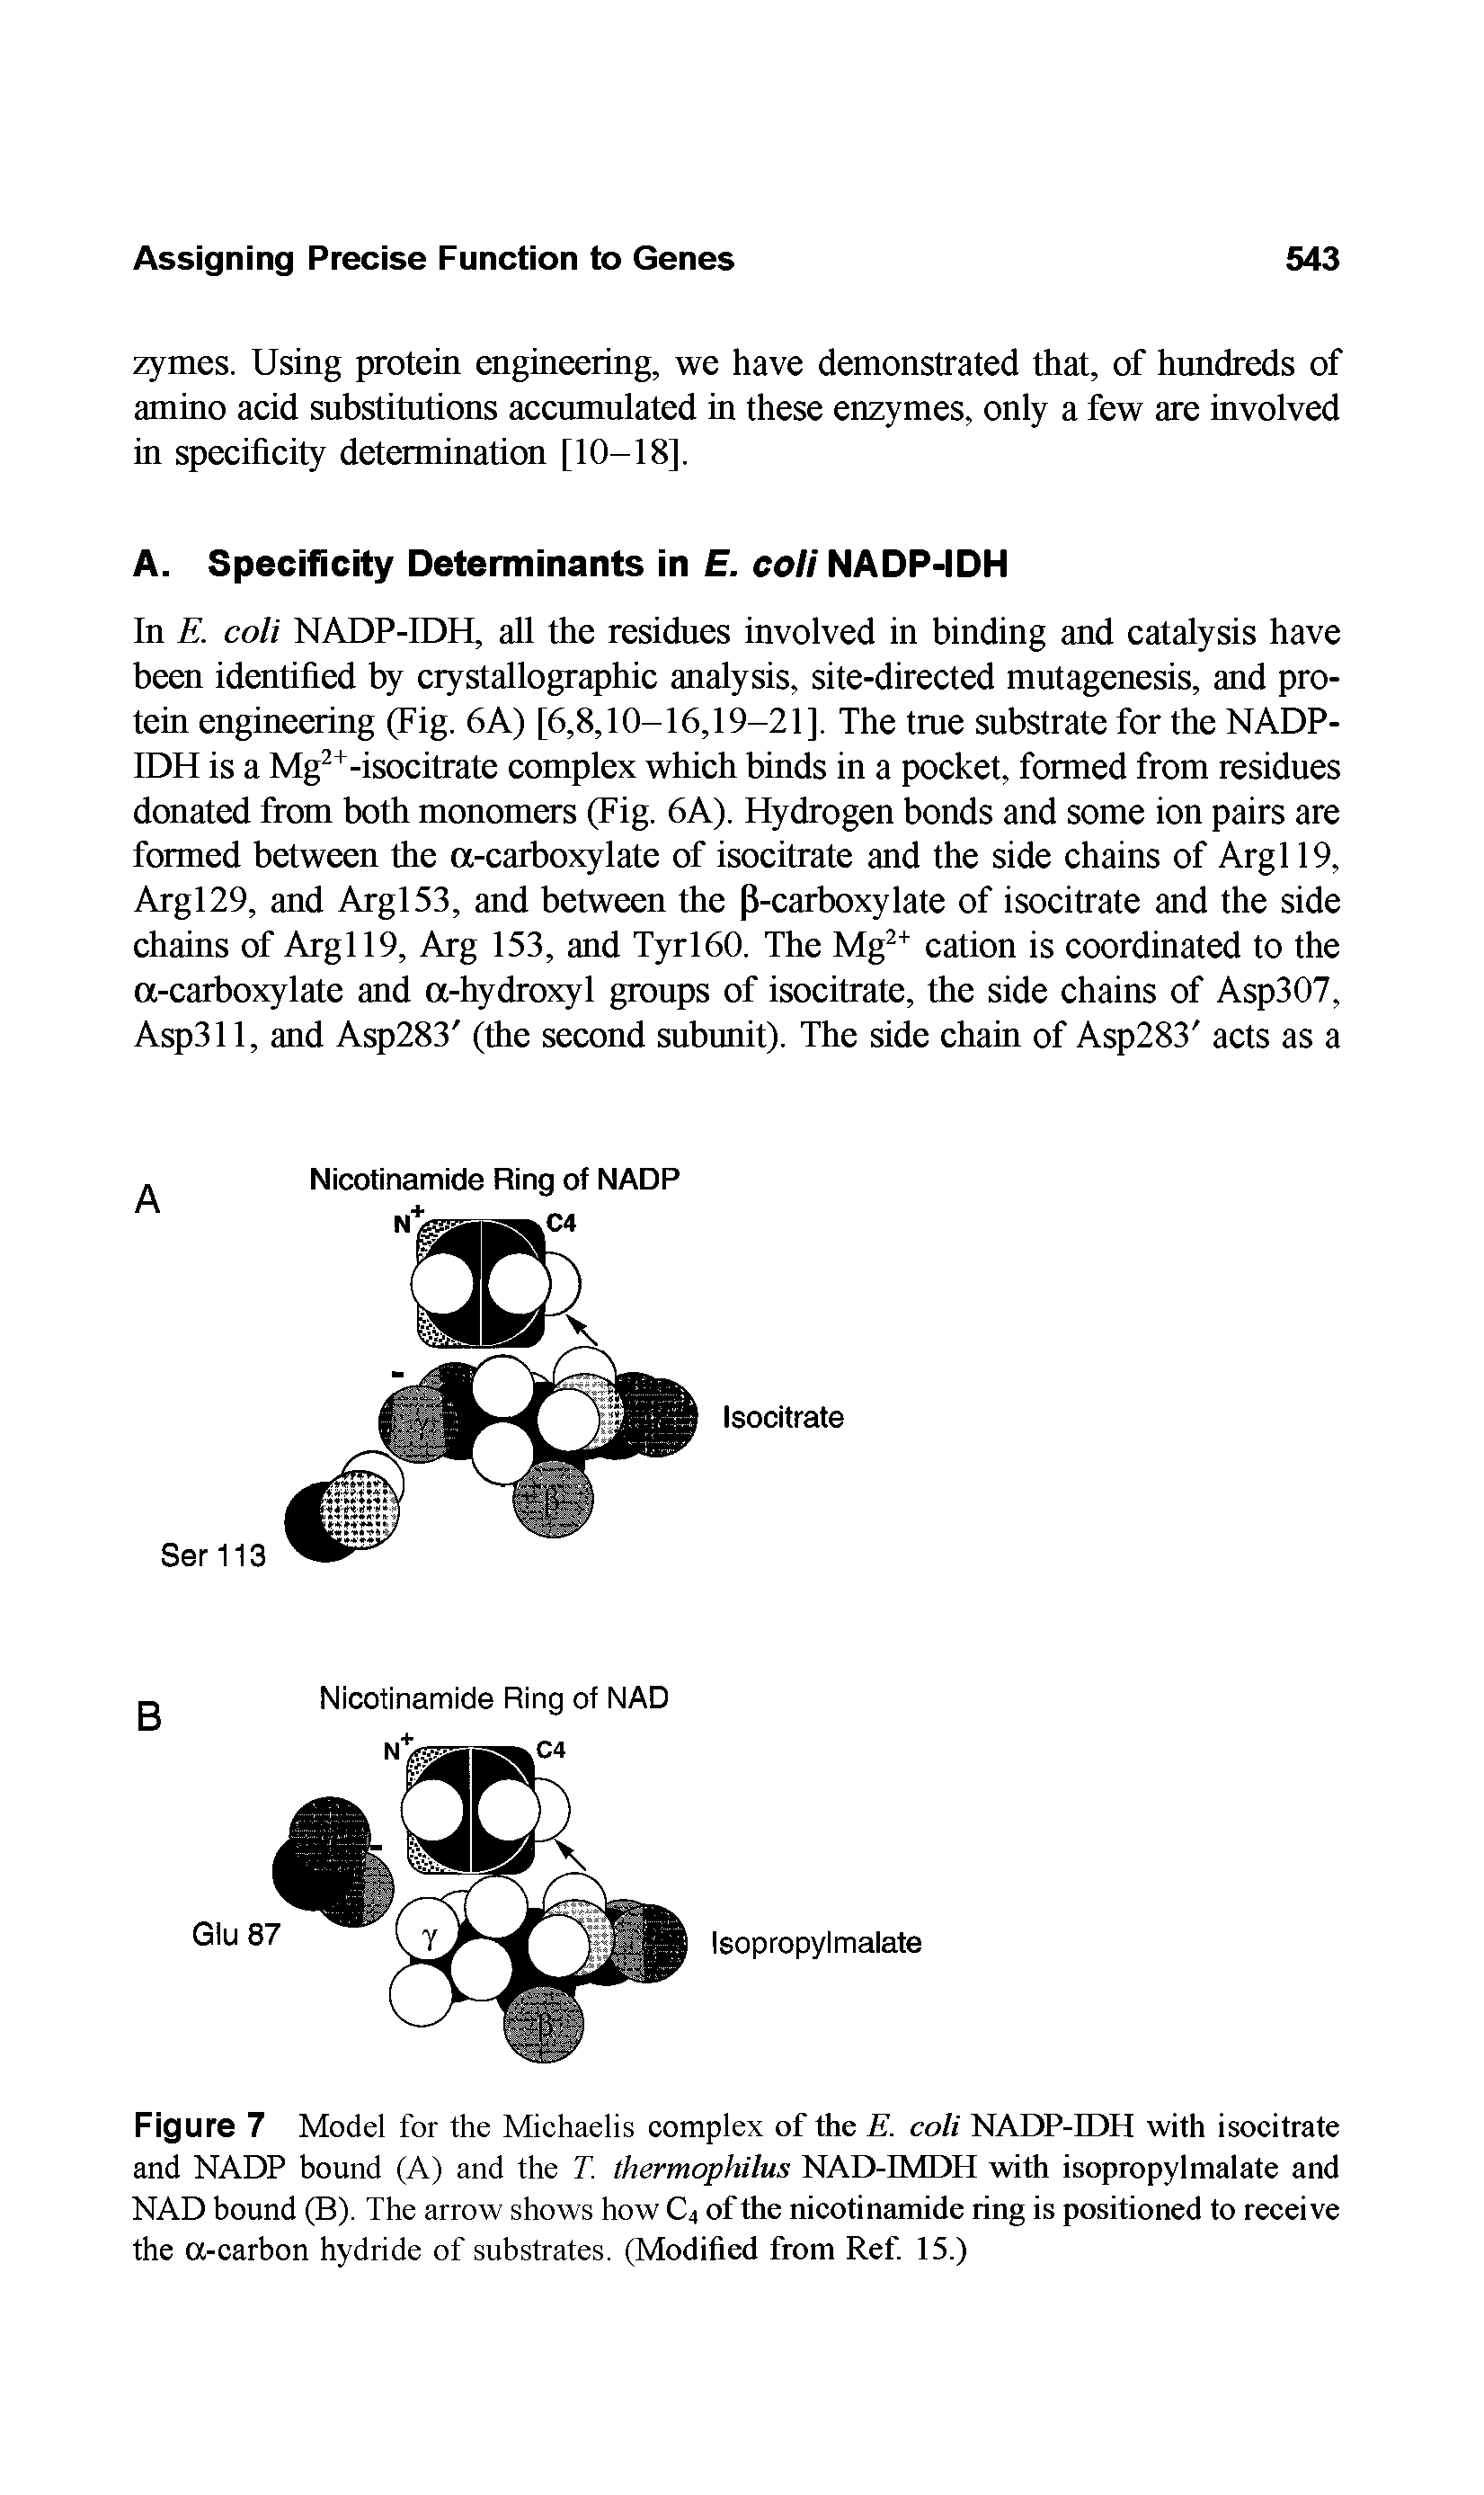 Figure 7 Model for the Michaelis complex of the E. coli NADP-IDH with isocitrate and NADP bound (A) and the T. thermophilus NAD-IMDH with isopropylmalate and NAD bound (B). The arrow shows how C4 of the nicotinamide ring is positioned to receive the a-carbon hydride of substrates. (Modified from Ref. 15.)...